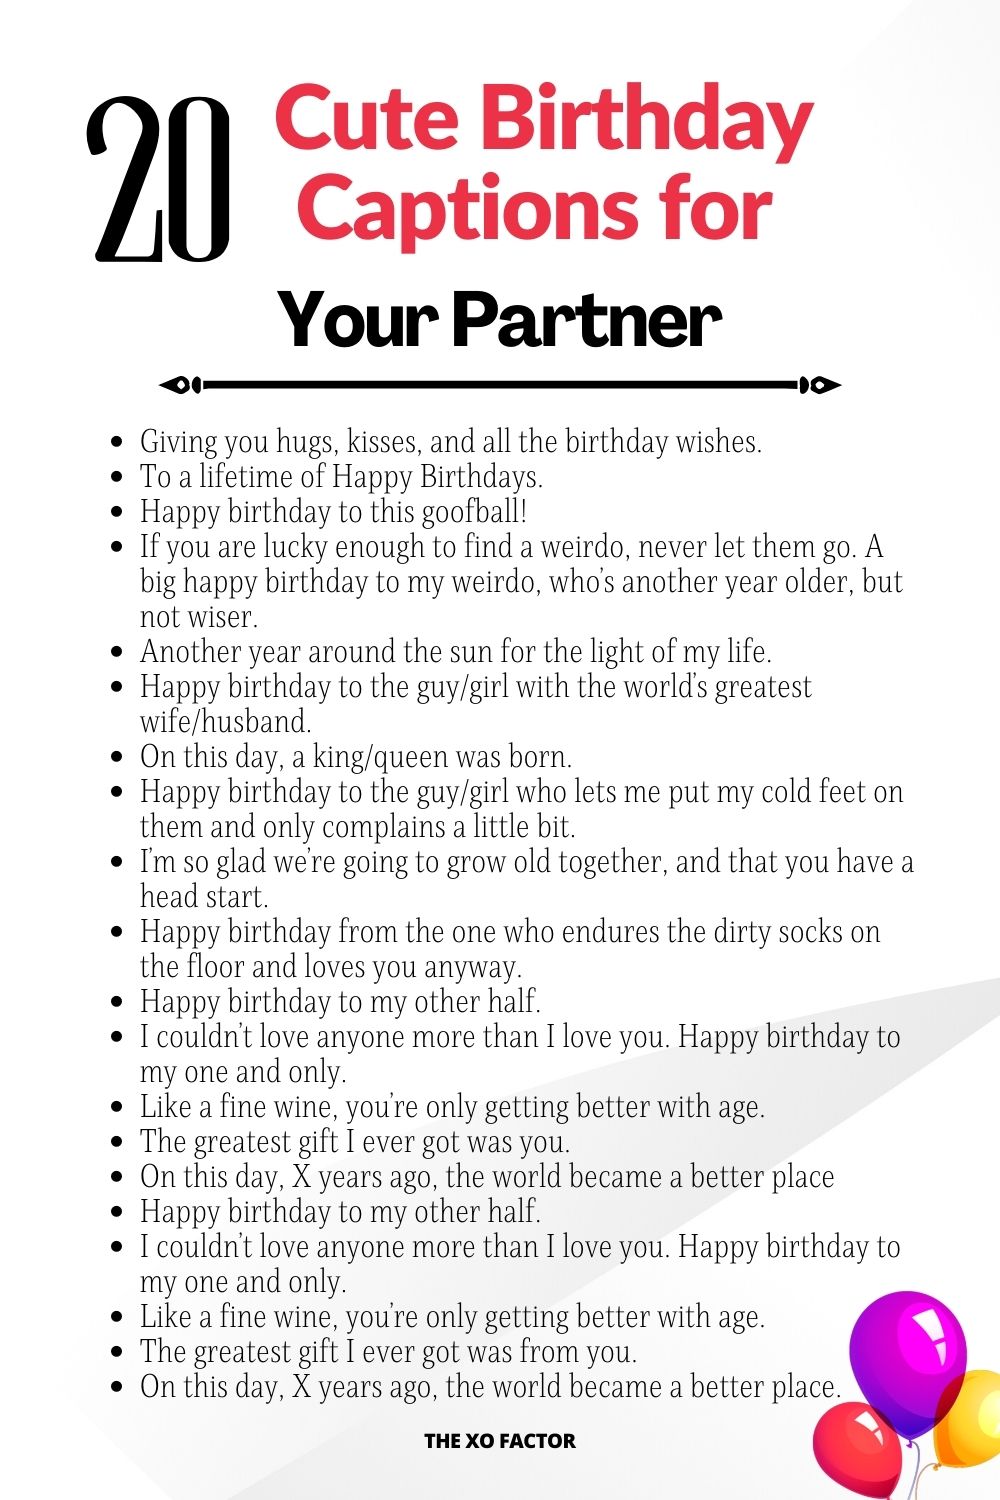 Cute Birthday Captions for Your Partner